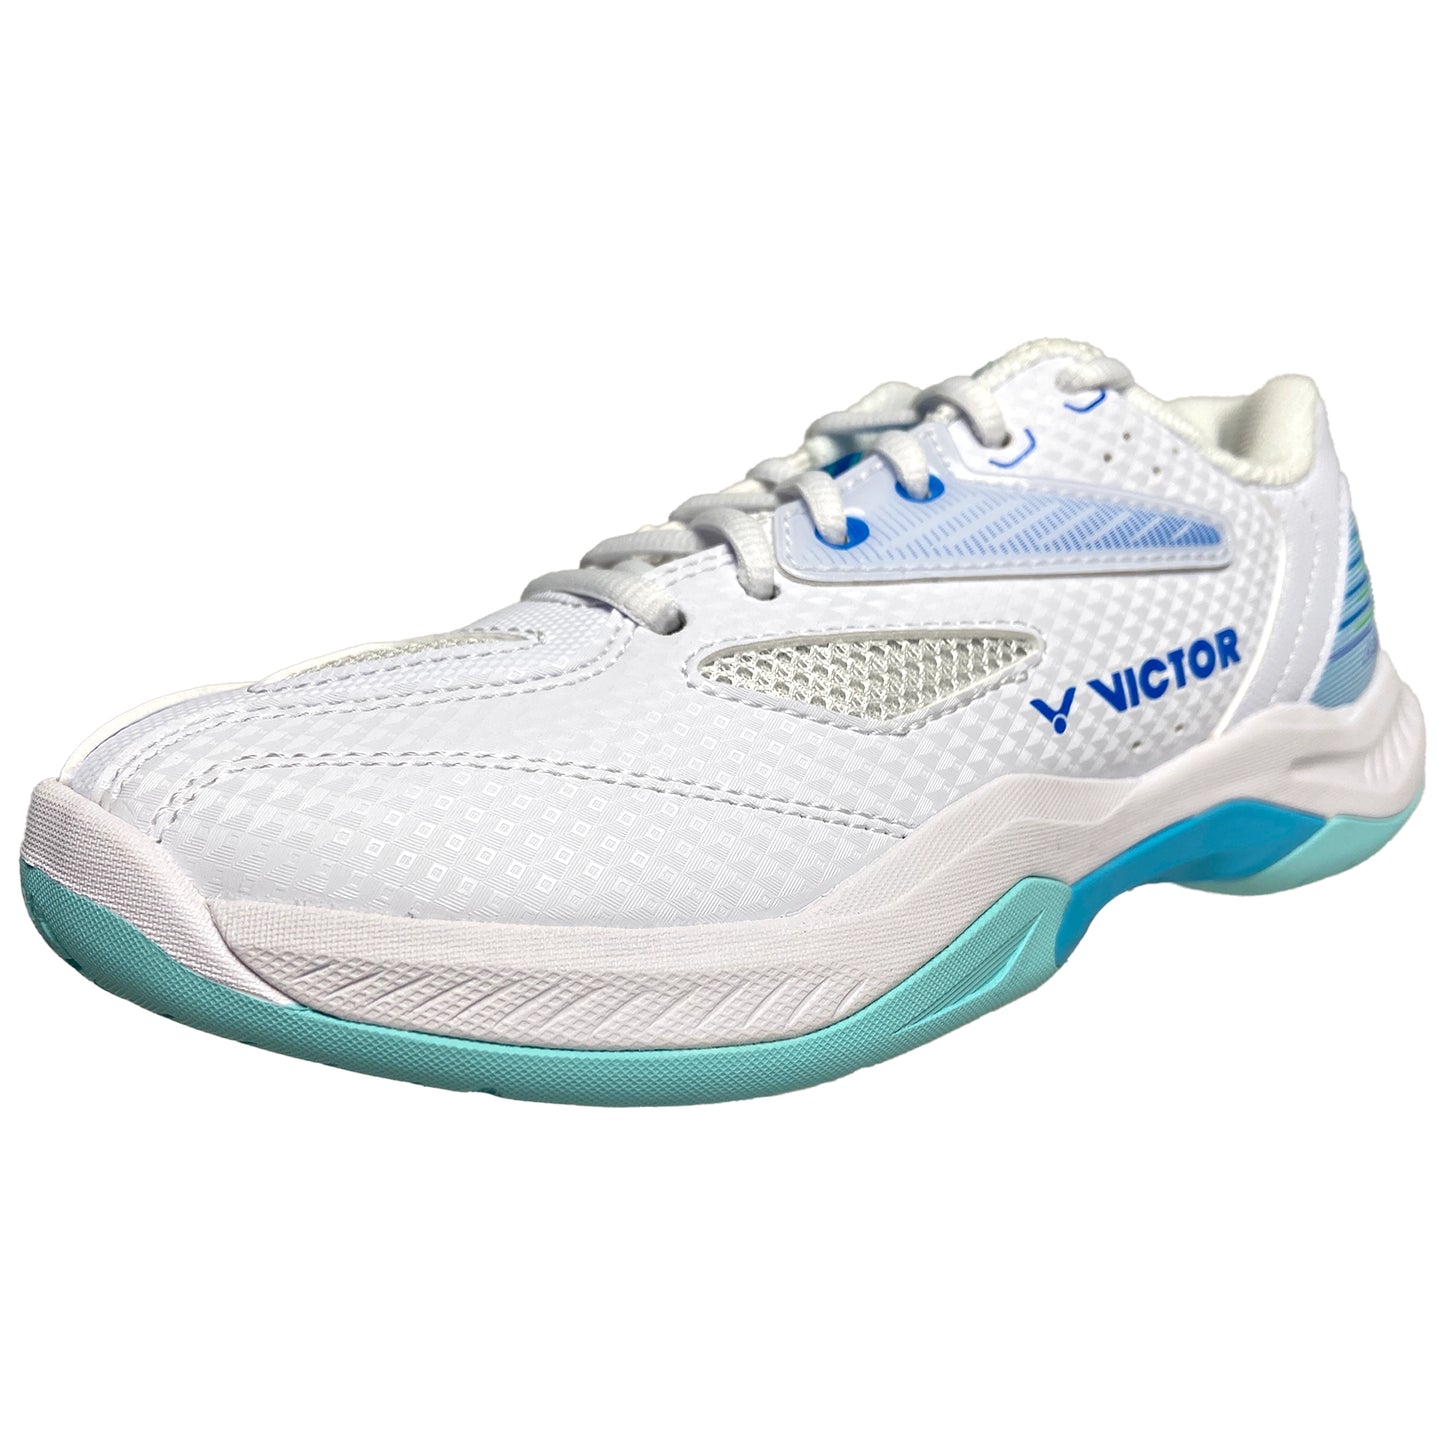 Victor Indoor Femme A391 A